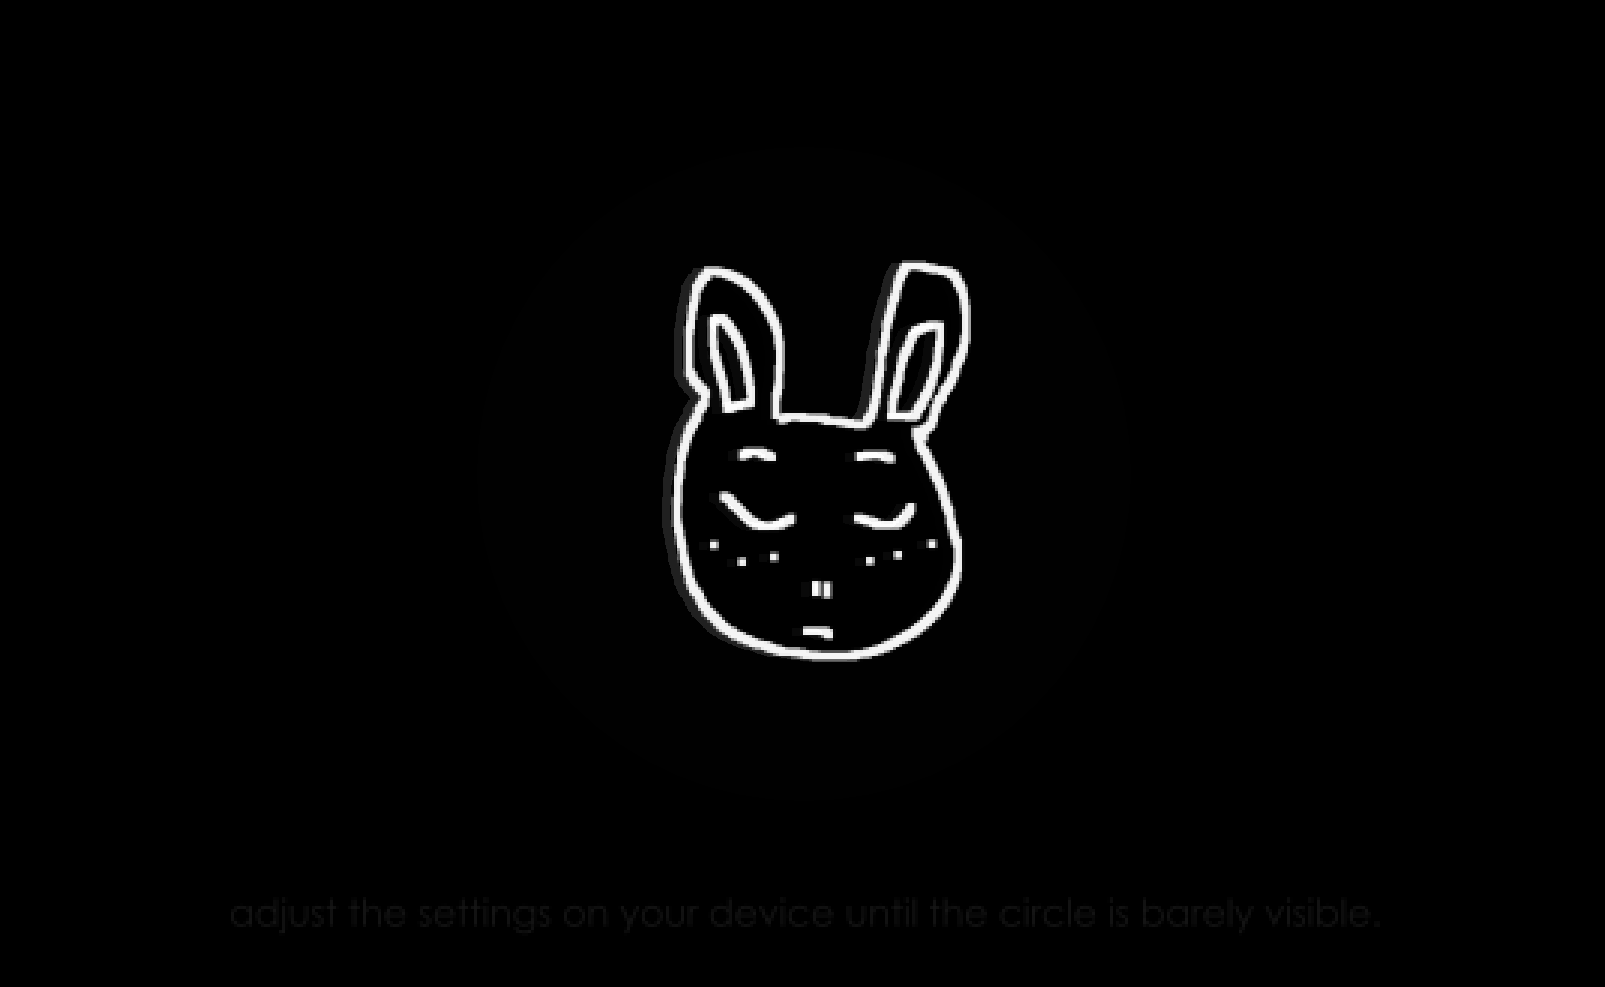 faint gray text saying "adjust the settings on your device until the circle is barely visible." &  gloomy bunny person